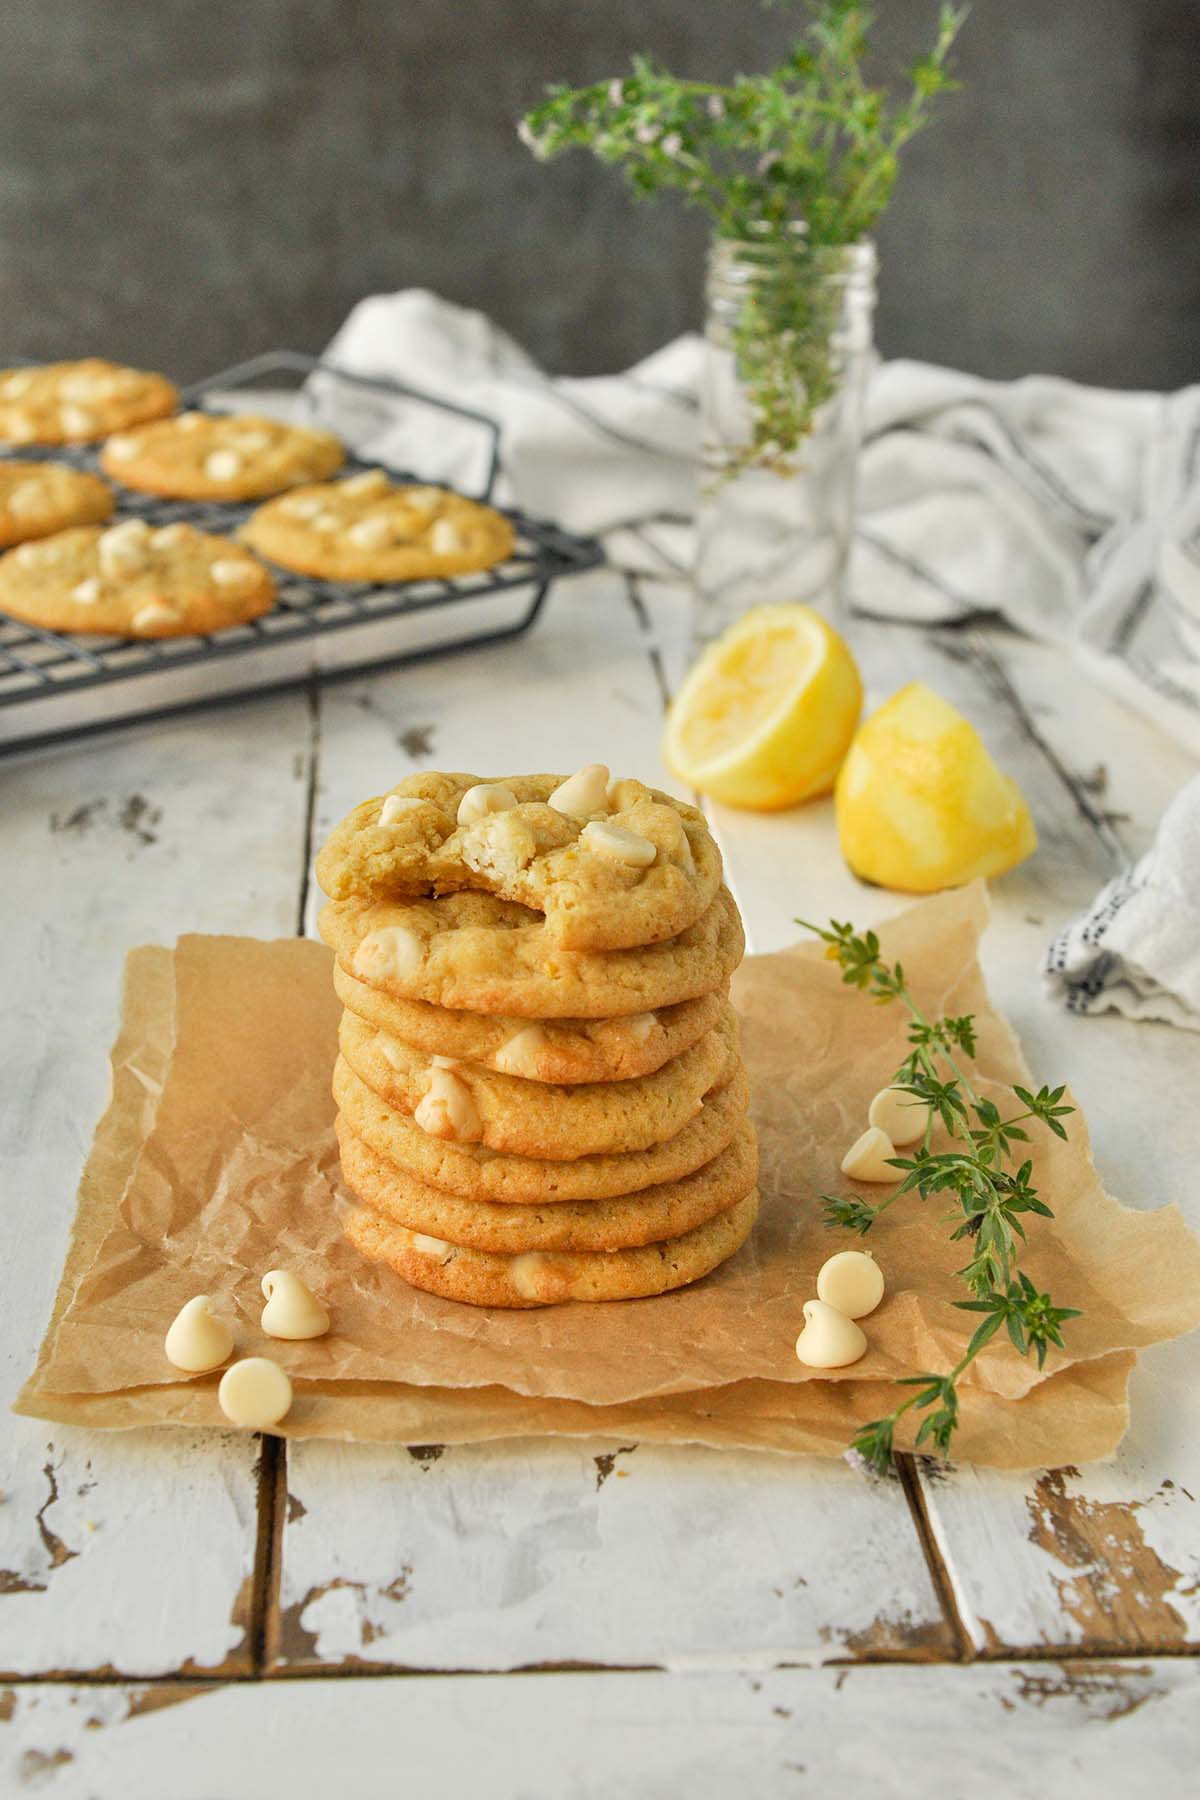 A stack of 7 cookies on a piece of parchment with white chocolate chips. Lemons and tray of cookies in the background.